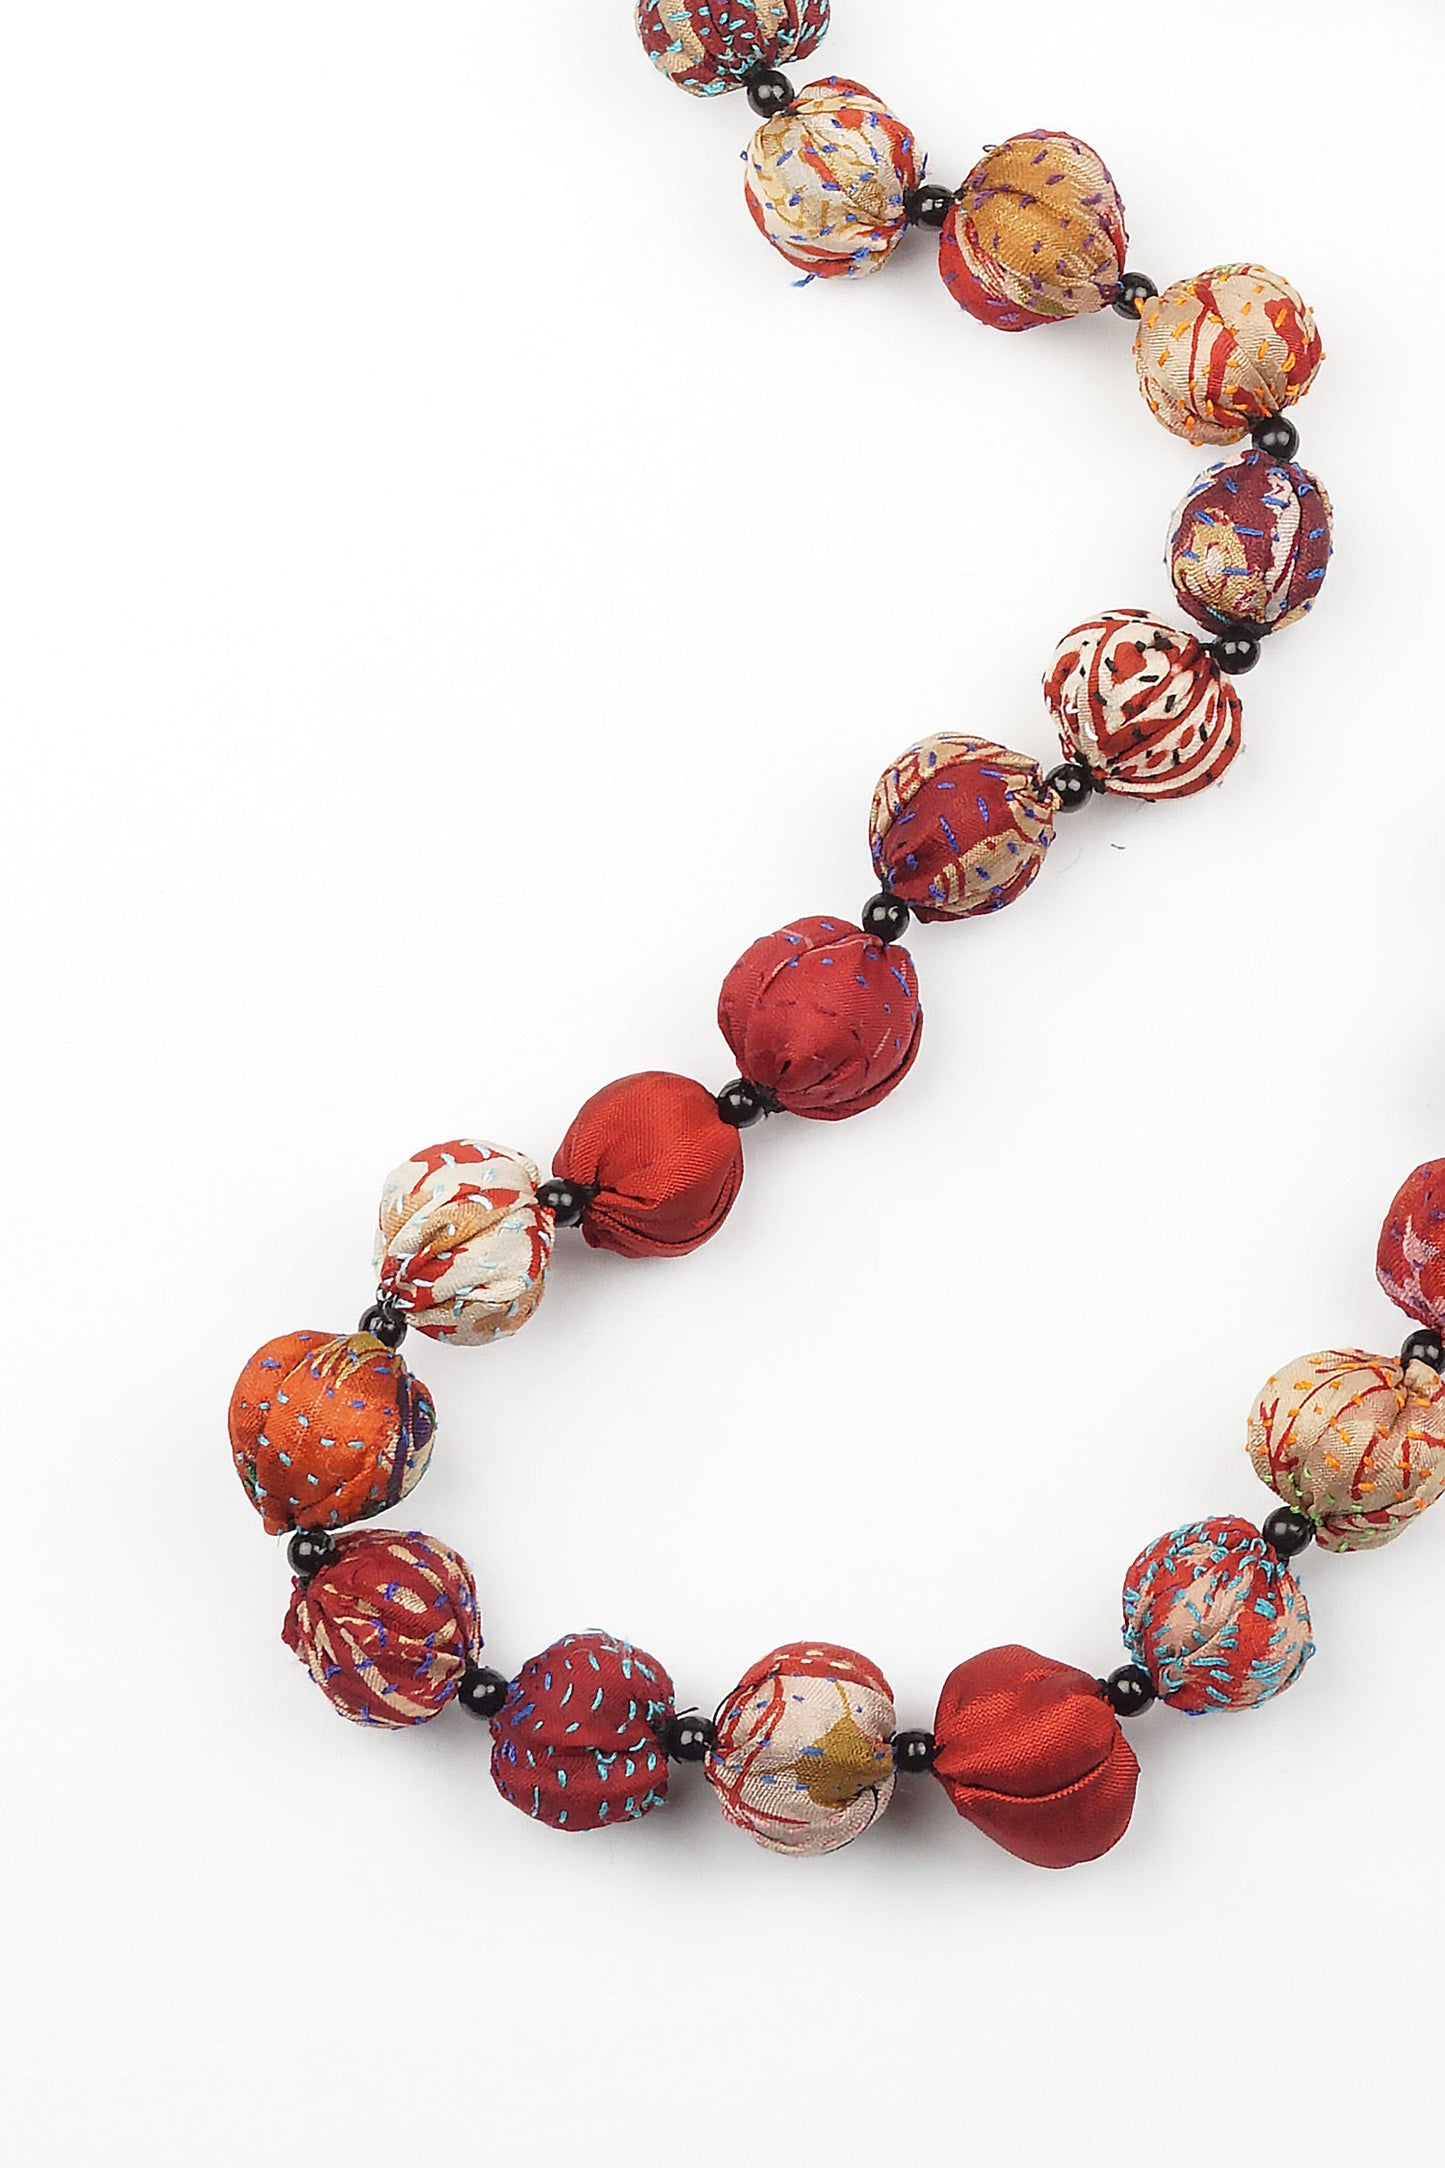 VINTAGE SILK KANTHA SMALL NUTS LONG NECKLACE - sv2706-red -